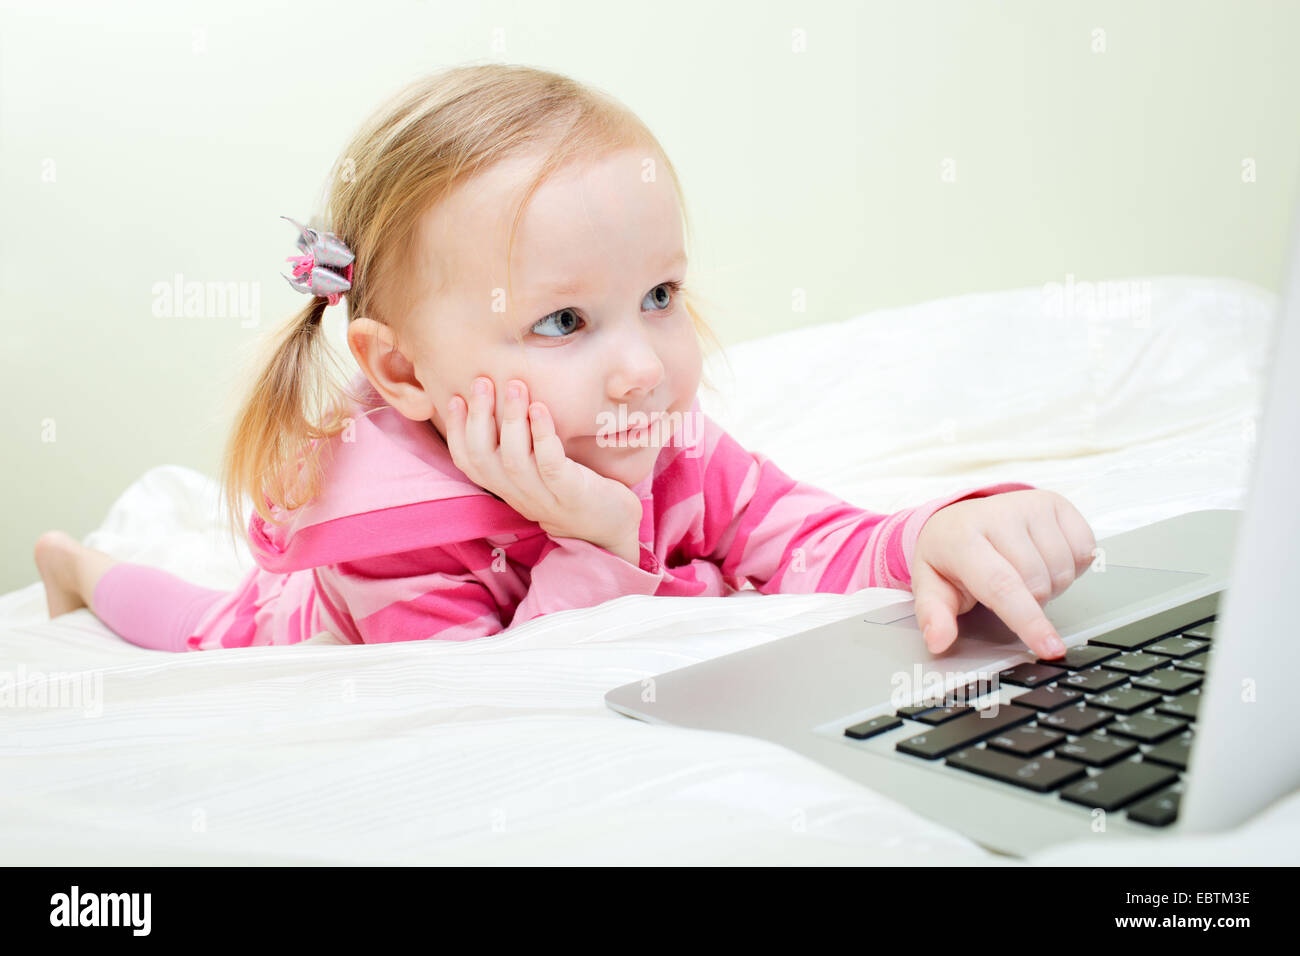 little girl lying in bed in front of a laptop Stock Photo